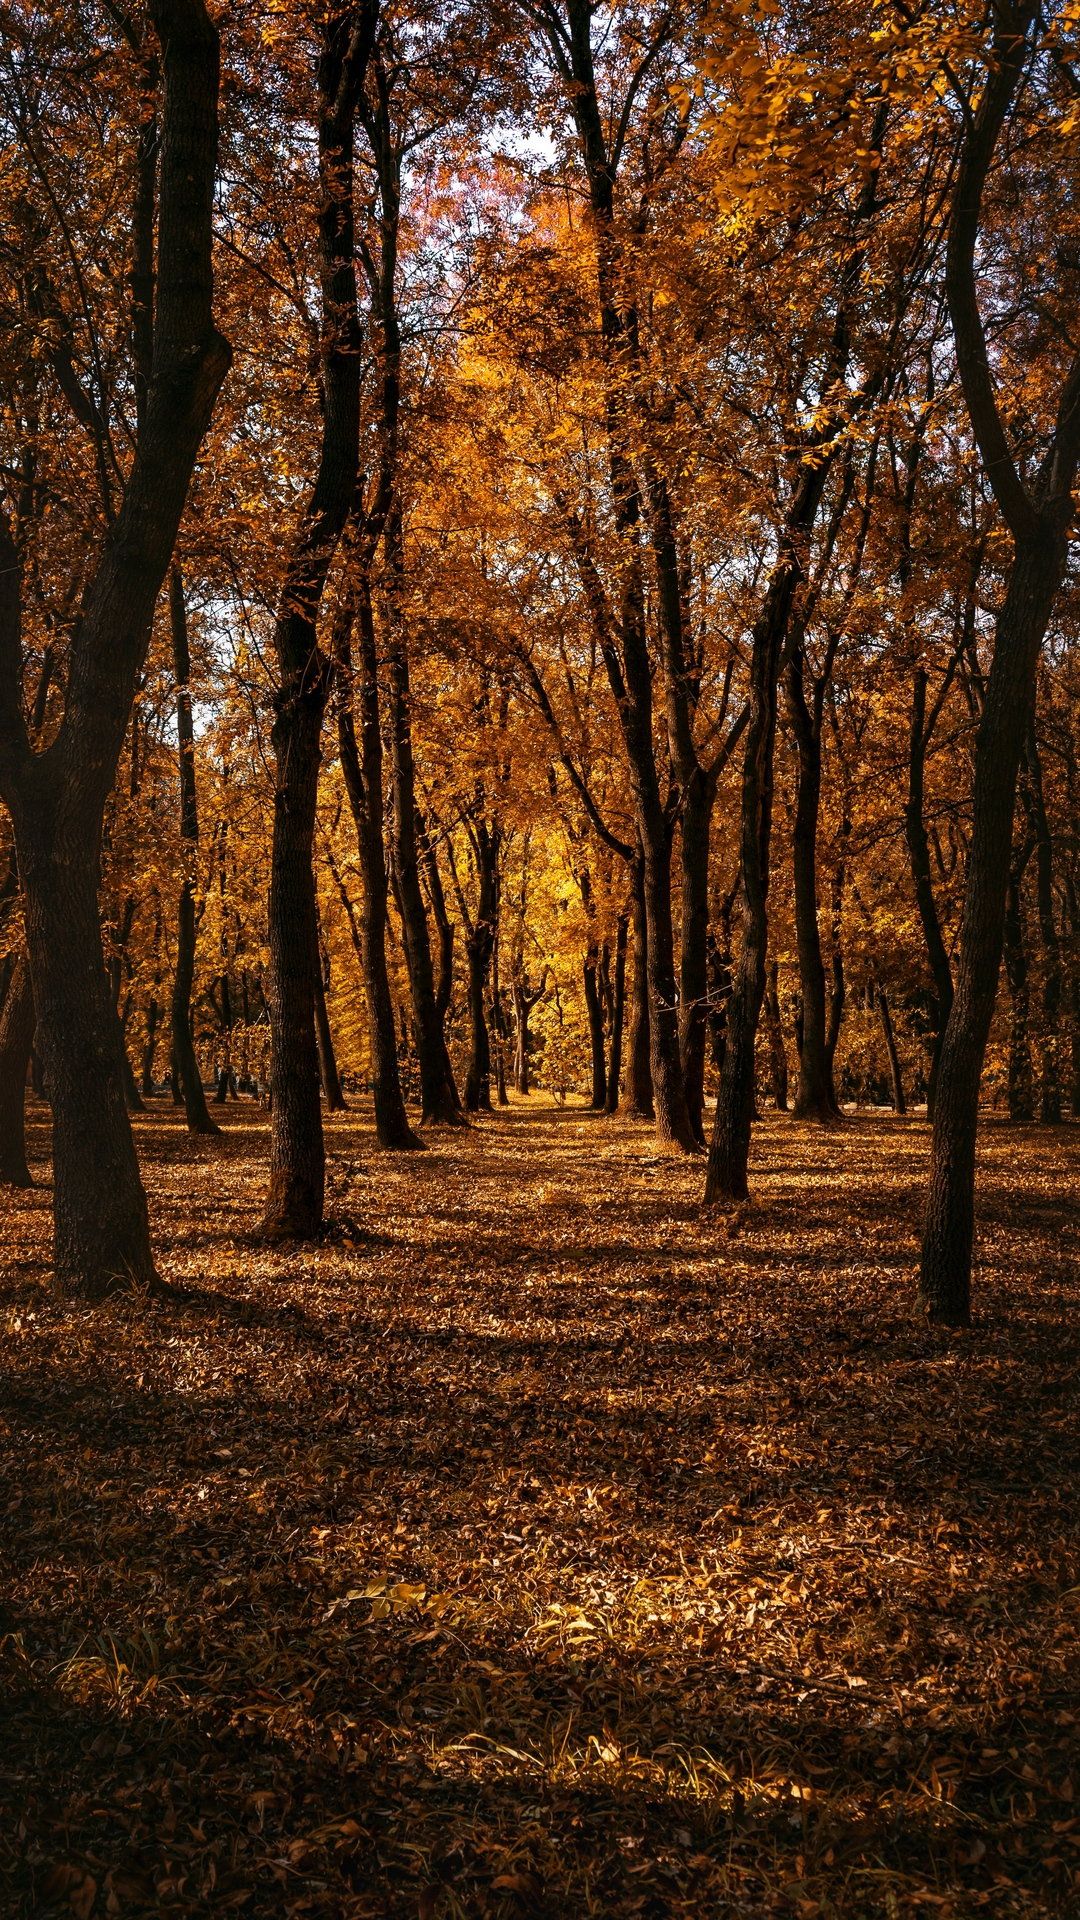 Autumn Forest Trees Wallpaper - [1080x1920]